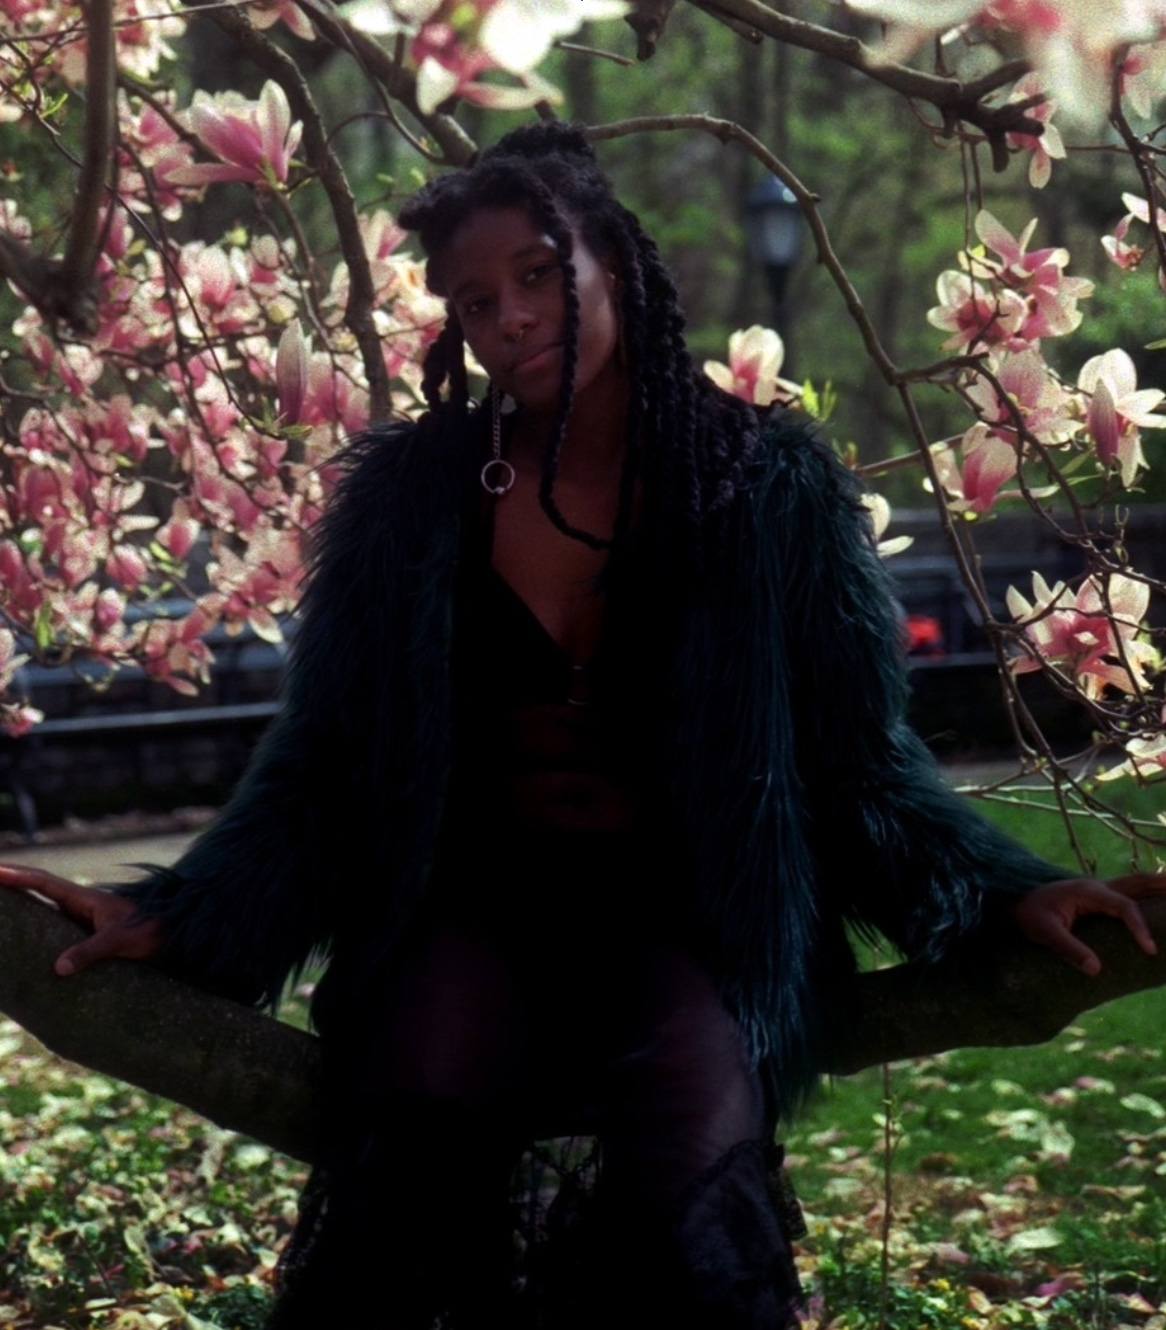 A dark skinned agender person with long black hair in twists is wearing a dark green shaggy coat, black top, mesh skirt while sitting on a bench surrounded by ombre blossom pink to white magnolia blossoms in prospect park, brooklyn.